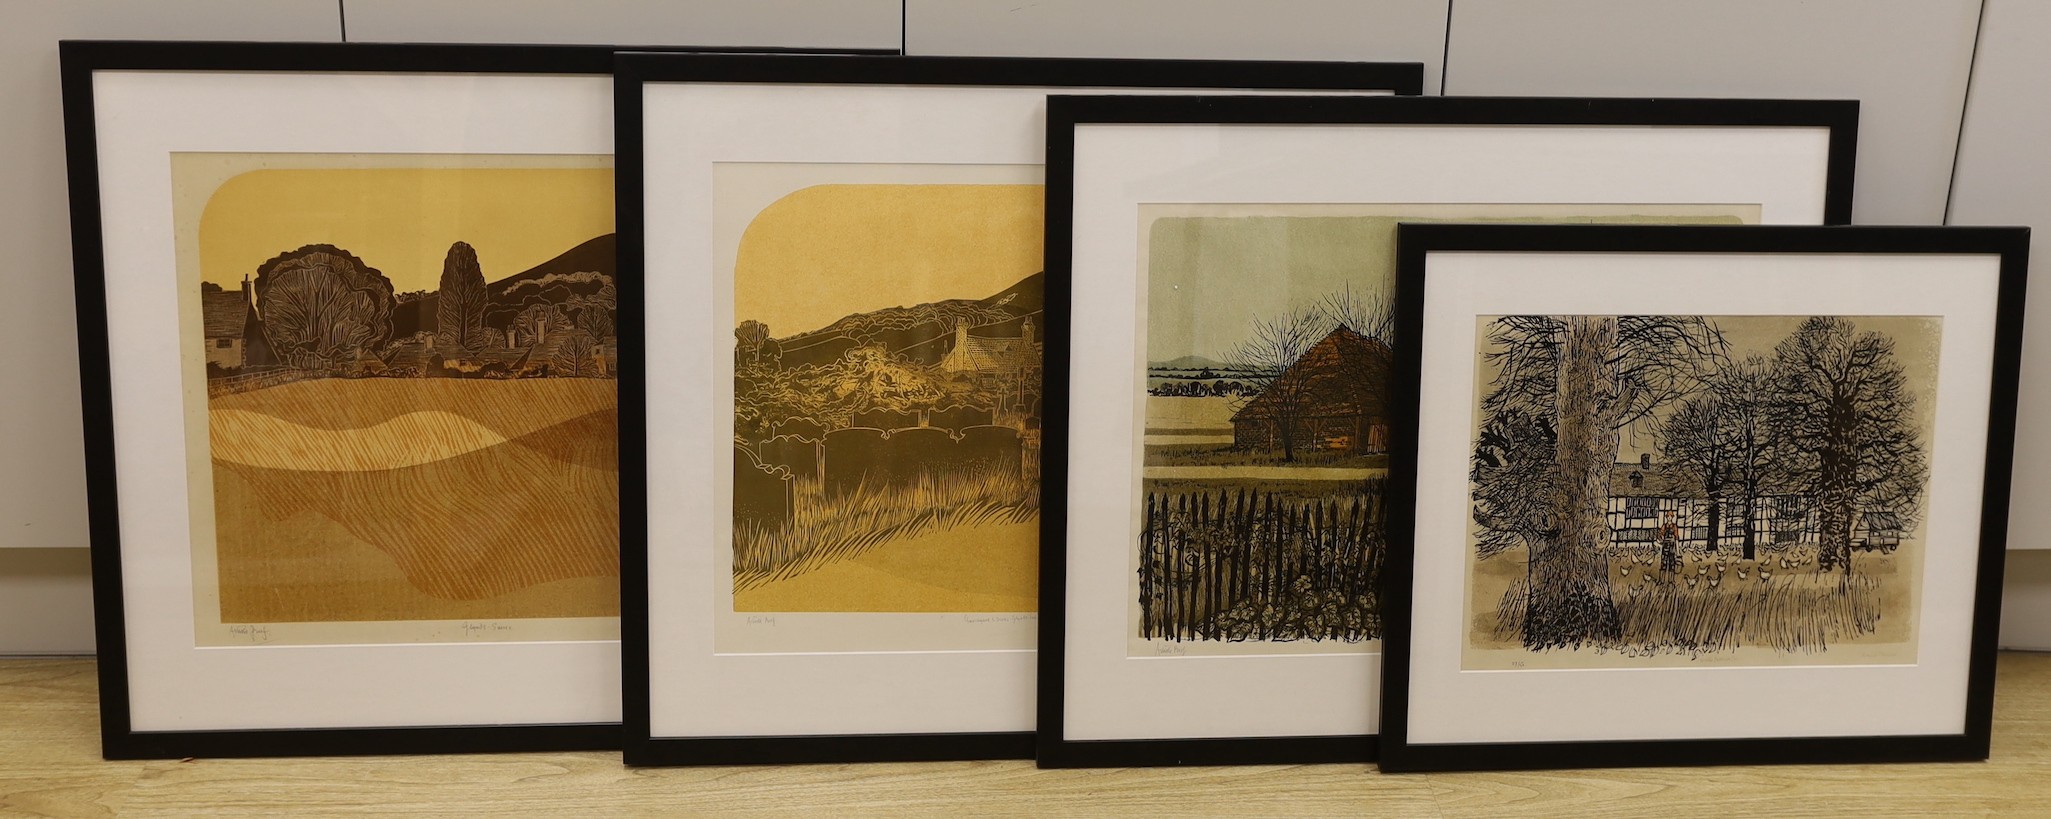 Robert Tavener (1920-2004) four lithographs, ‘Winter Paddock (2)’ 27/50, Glynde - Sussex’, ‘Churchyard and Downs, Glynde - Sussex’, ‘Old Farm and Barn’, all signed in pencil, largest 43 x 59cm